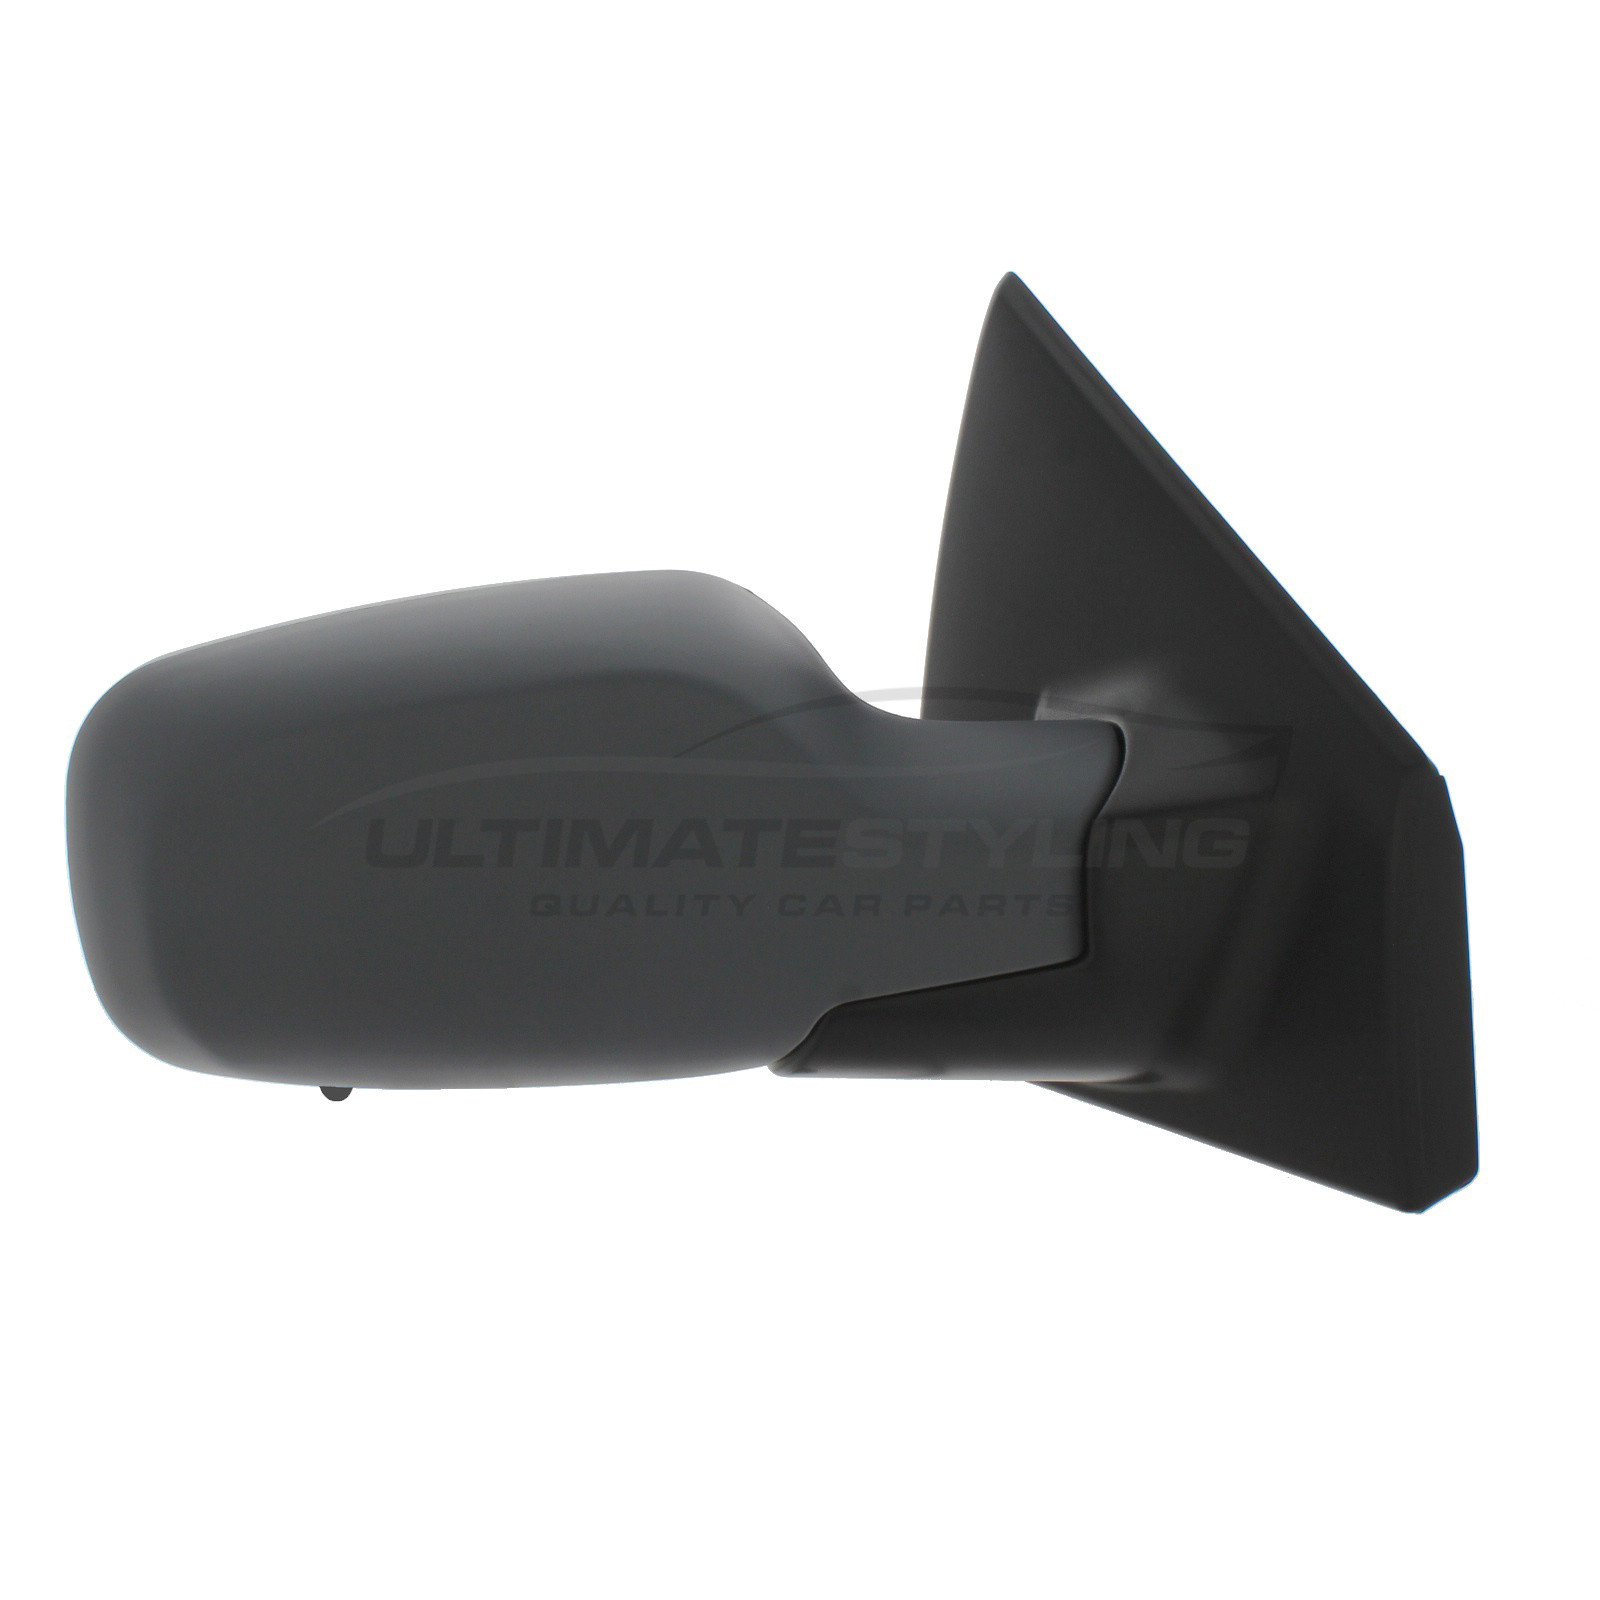 Renault Clio Wing Mirror / Door Mirror - Drivers Side (RH) - Electric adjusting - Heated Glass - Temperature Sensor - Primed for painting